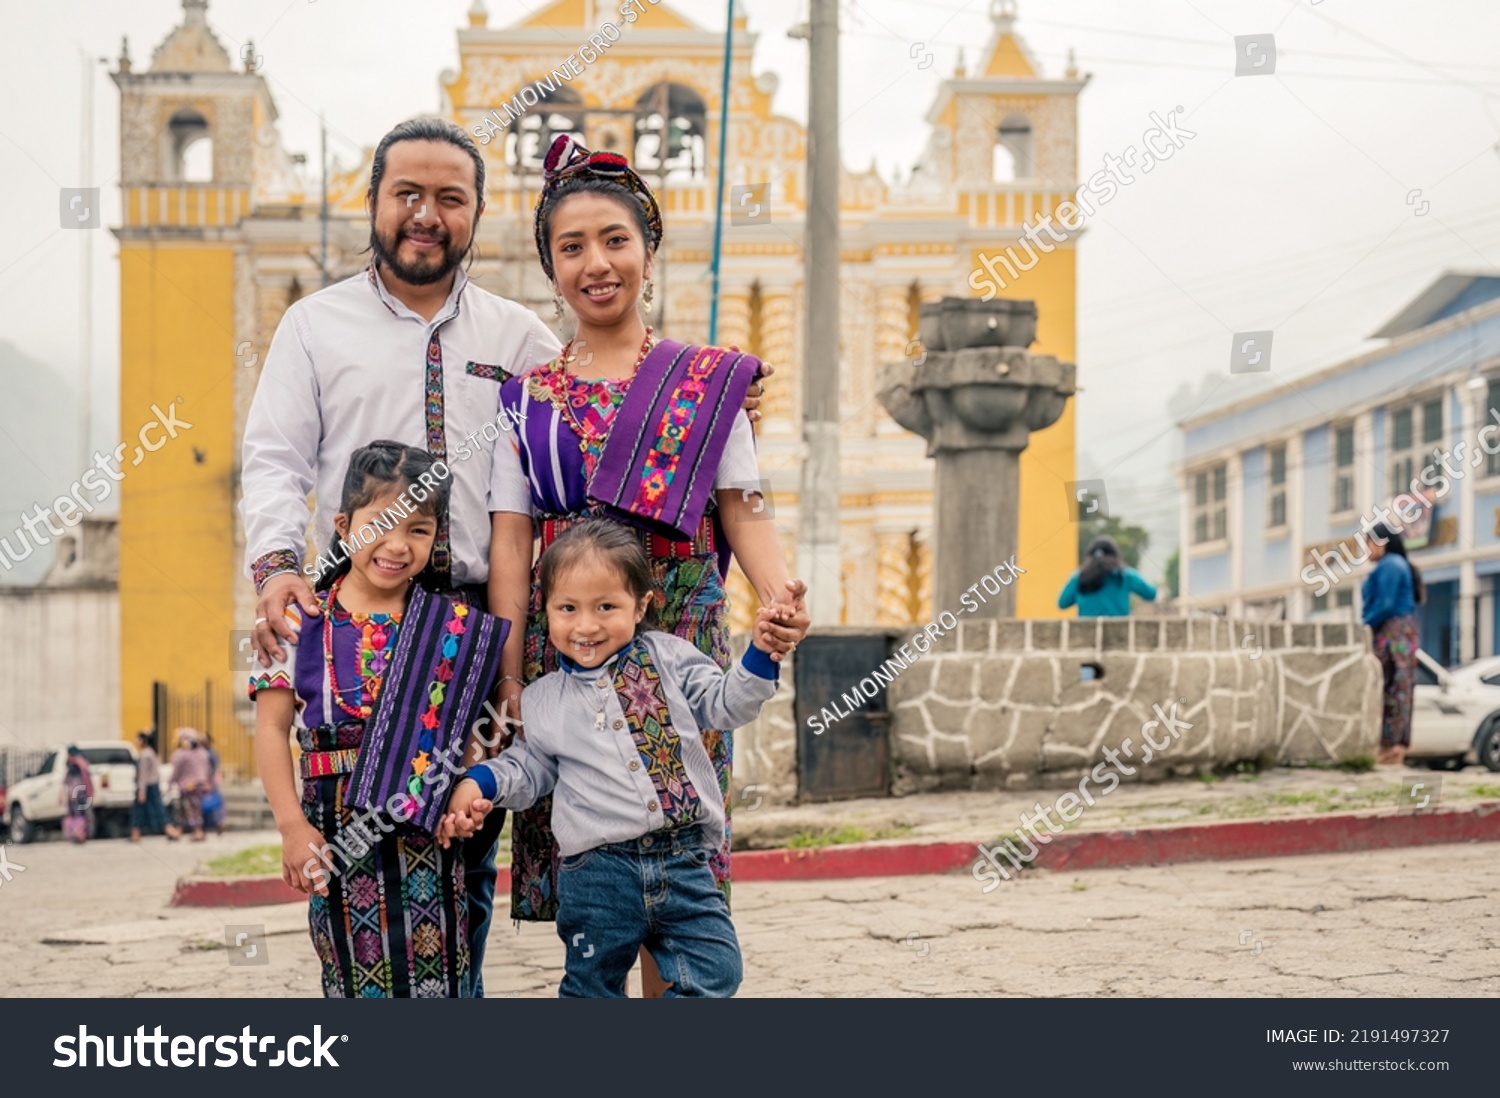 Latin family smiling looking at the camera with their two children.
Hispanic family in front of a church in a rural area. #2191497327